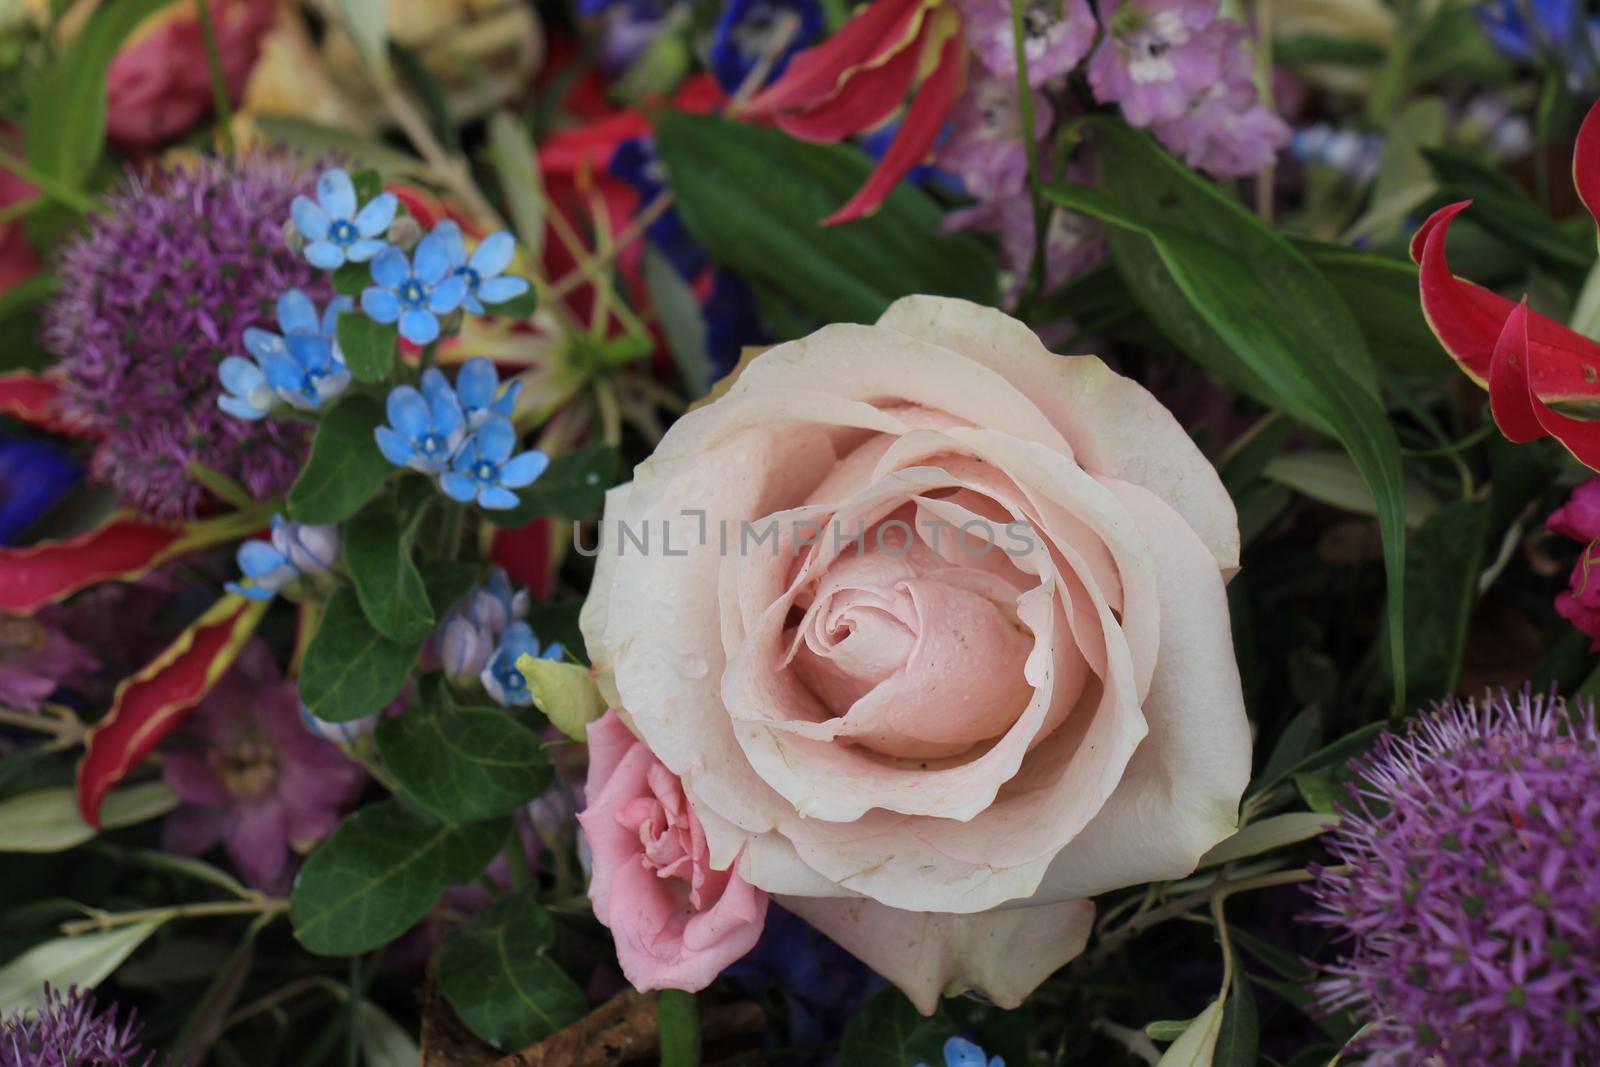 Big purple rose in a floral wedding decoration with small blue and purple flowers